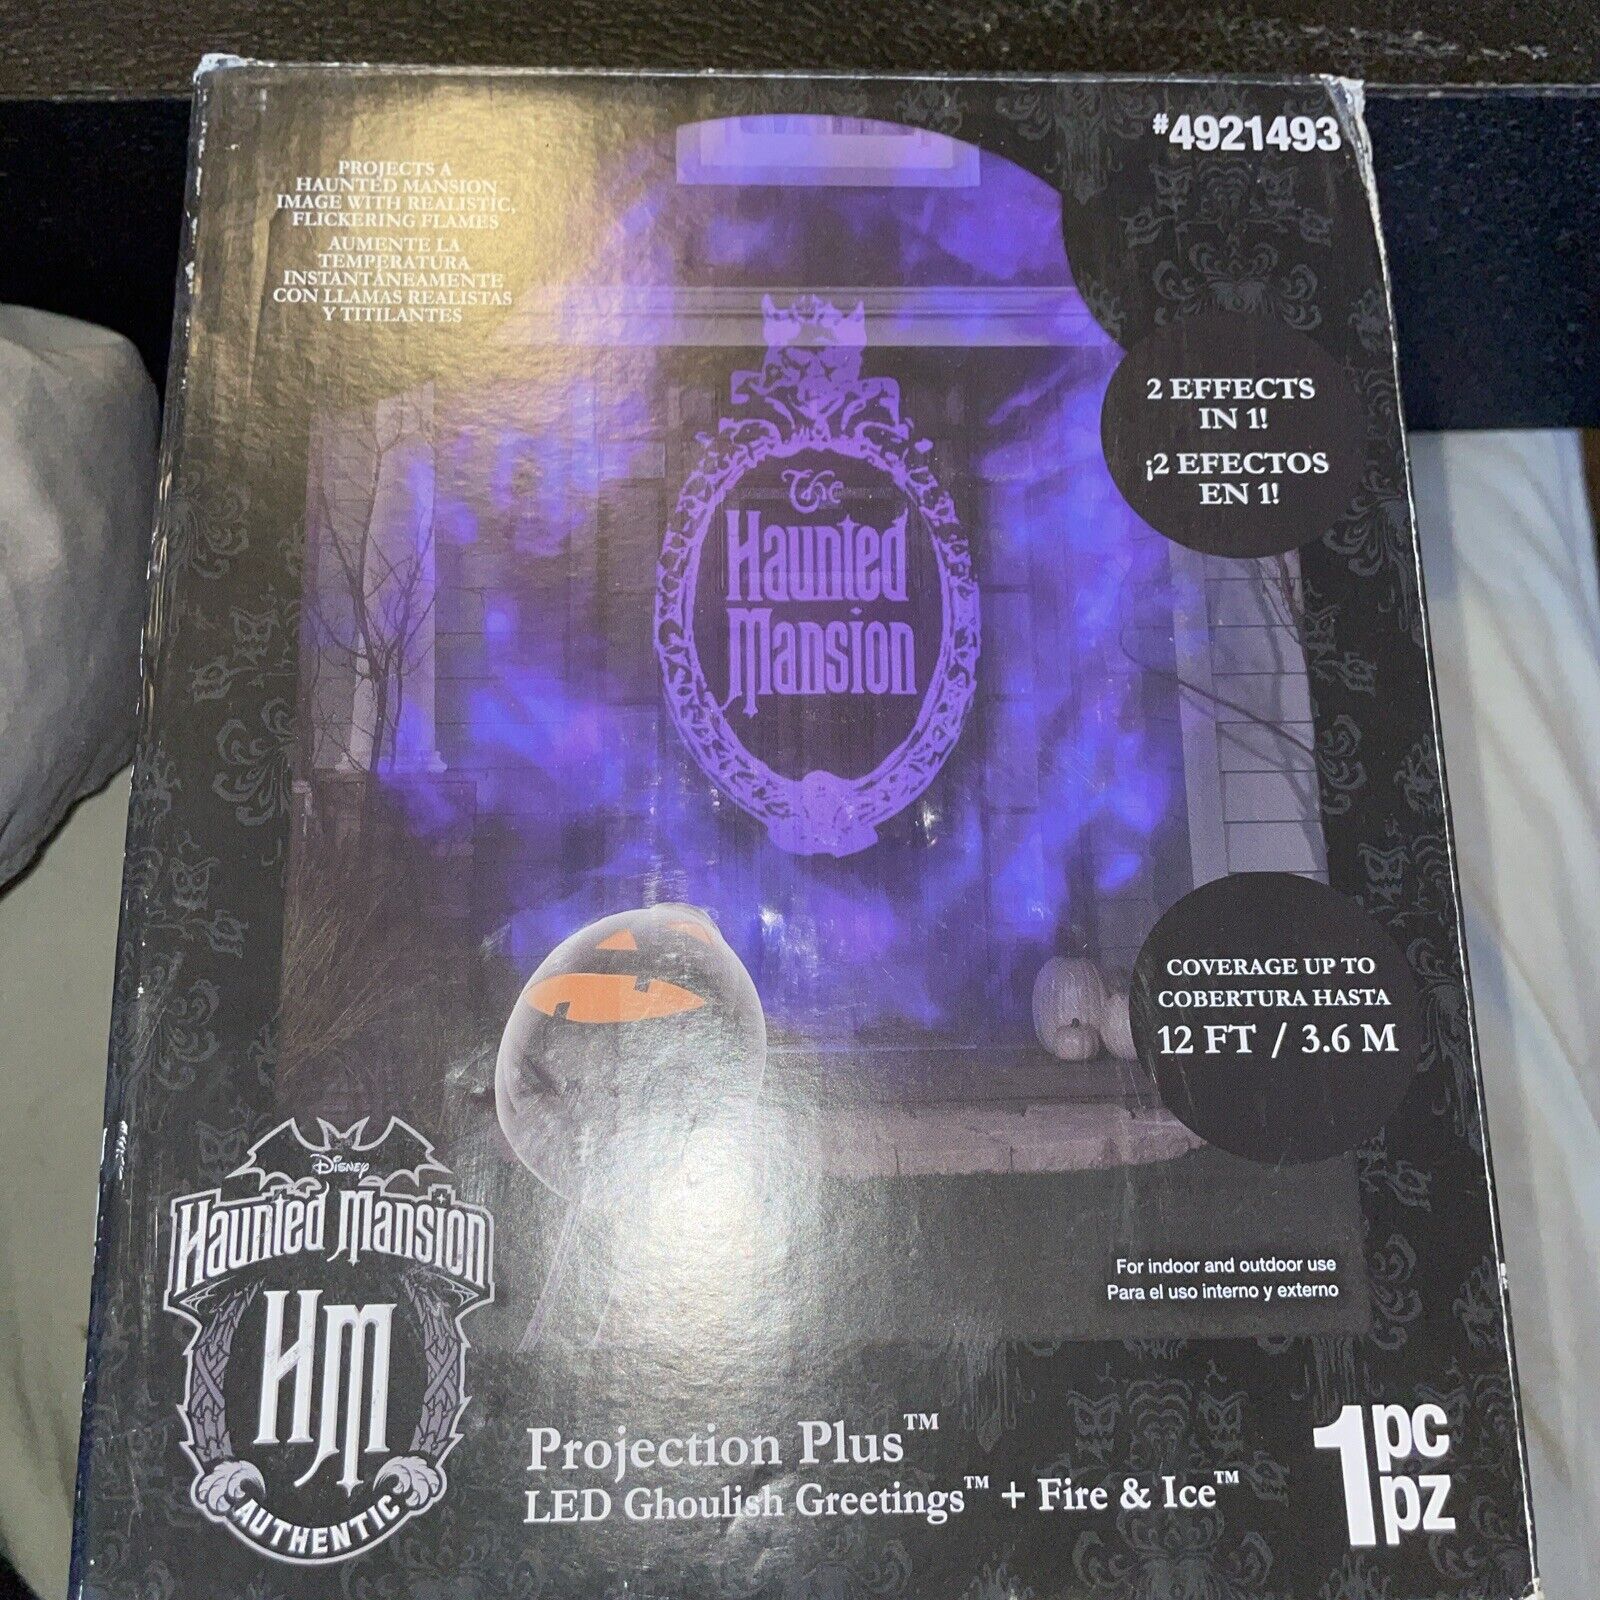 Gemmy Disney's Haunted Mansion Projection Plus Animated Halloween Projector -...